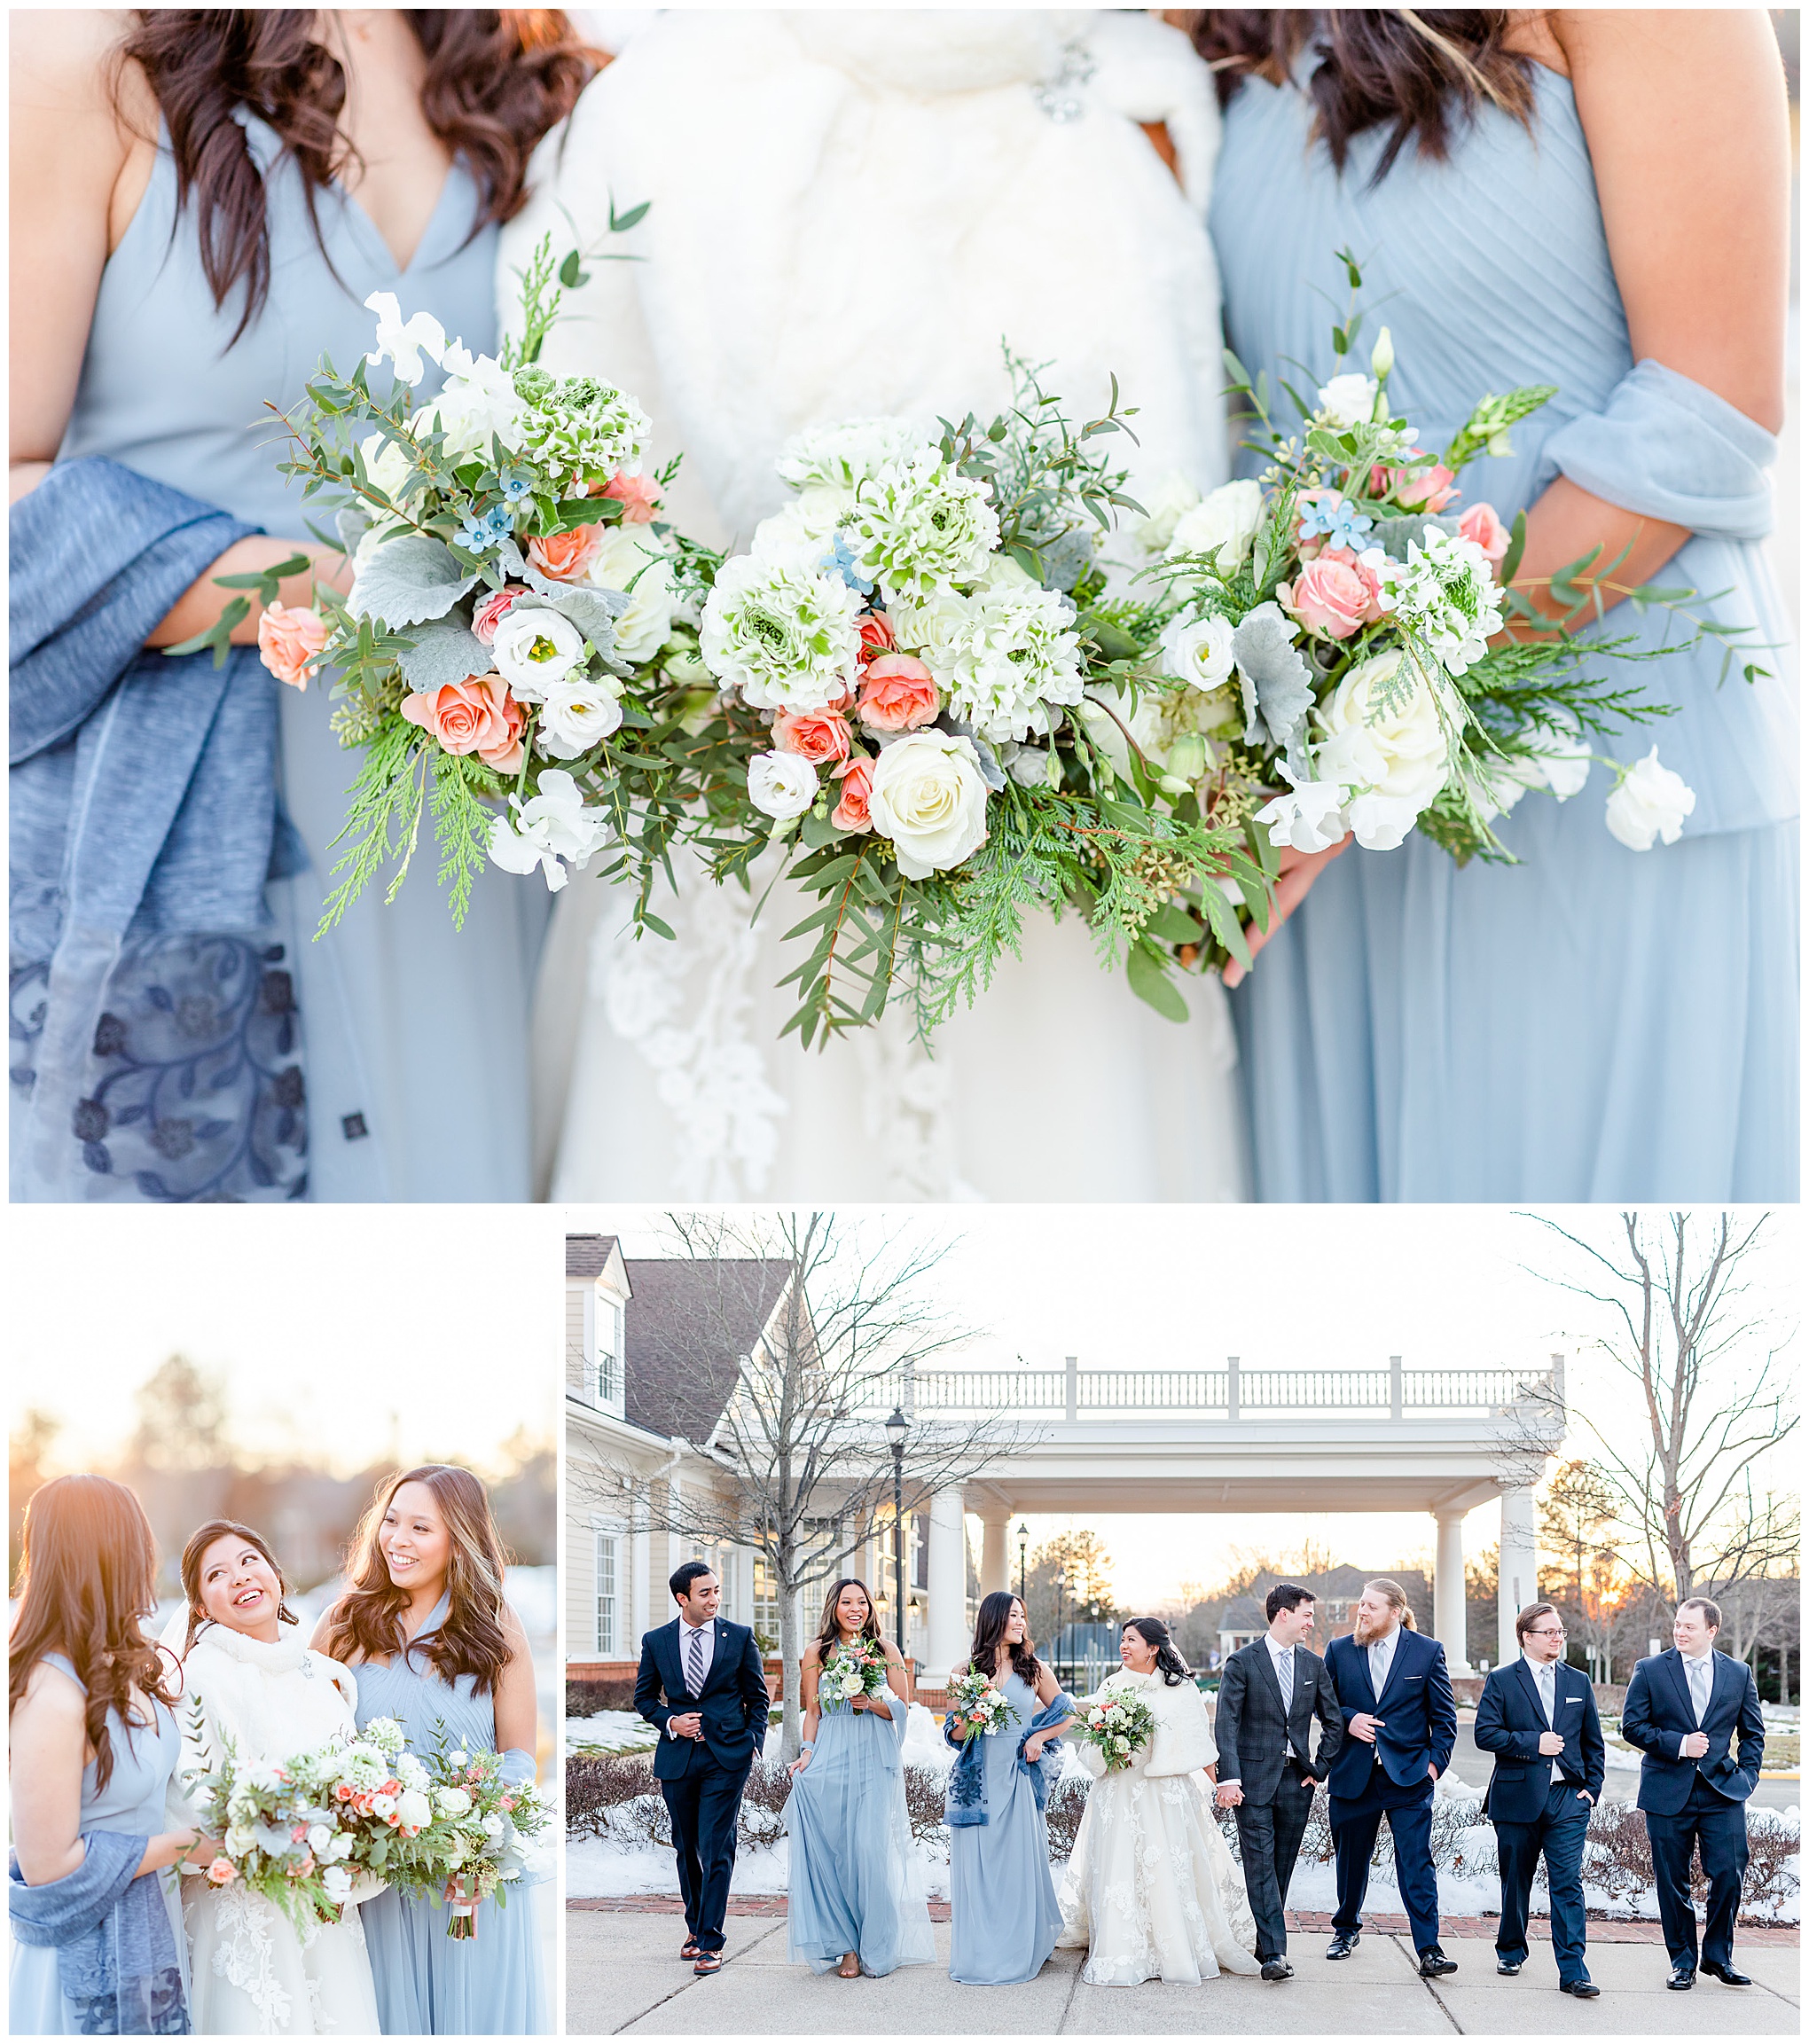 Regency at Dominion Valley wedding, Virginia country club wedding, Haymarket Virginia wedding, northern Virginia wedding, winter wedding, winter wedding aesthetic, DC micro wedding, northern Virginia wedding venues, classic winter wedding, Rachel E.H. Photography, acinda Mosby - Bridal Artistry DC, bride holding bouquets with bridesmaids, bride and groom linking arms with wedding party